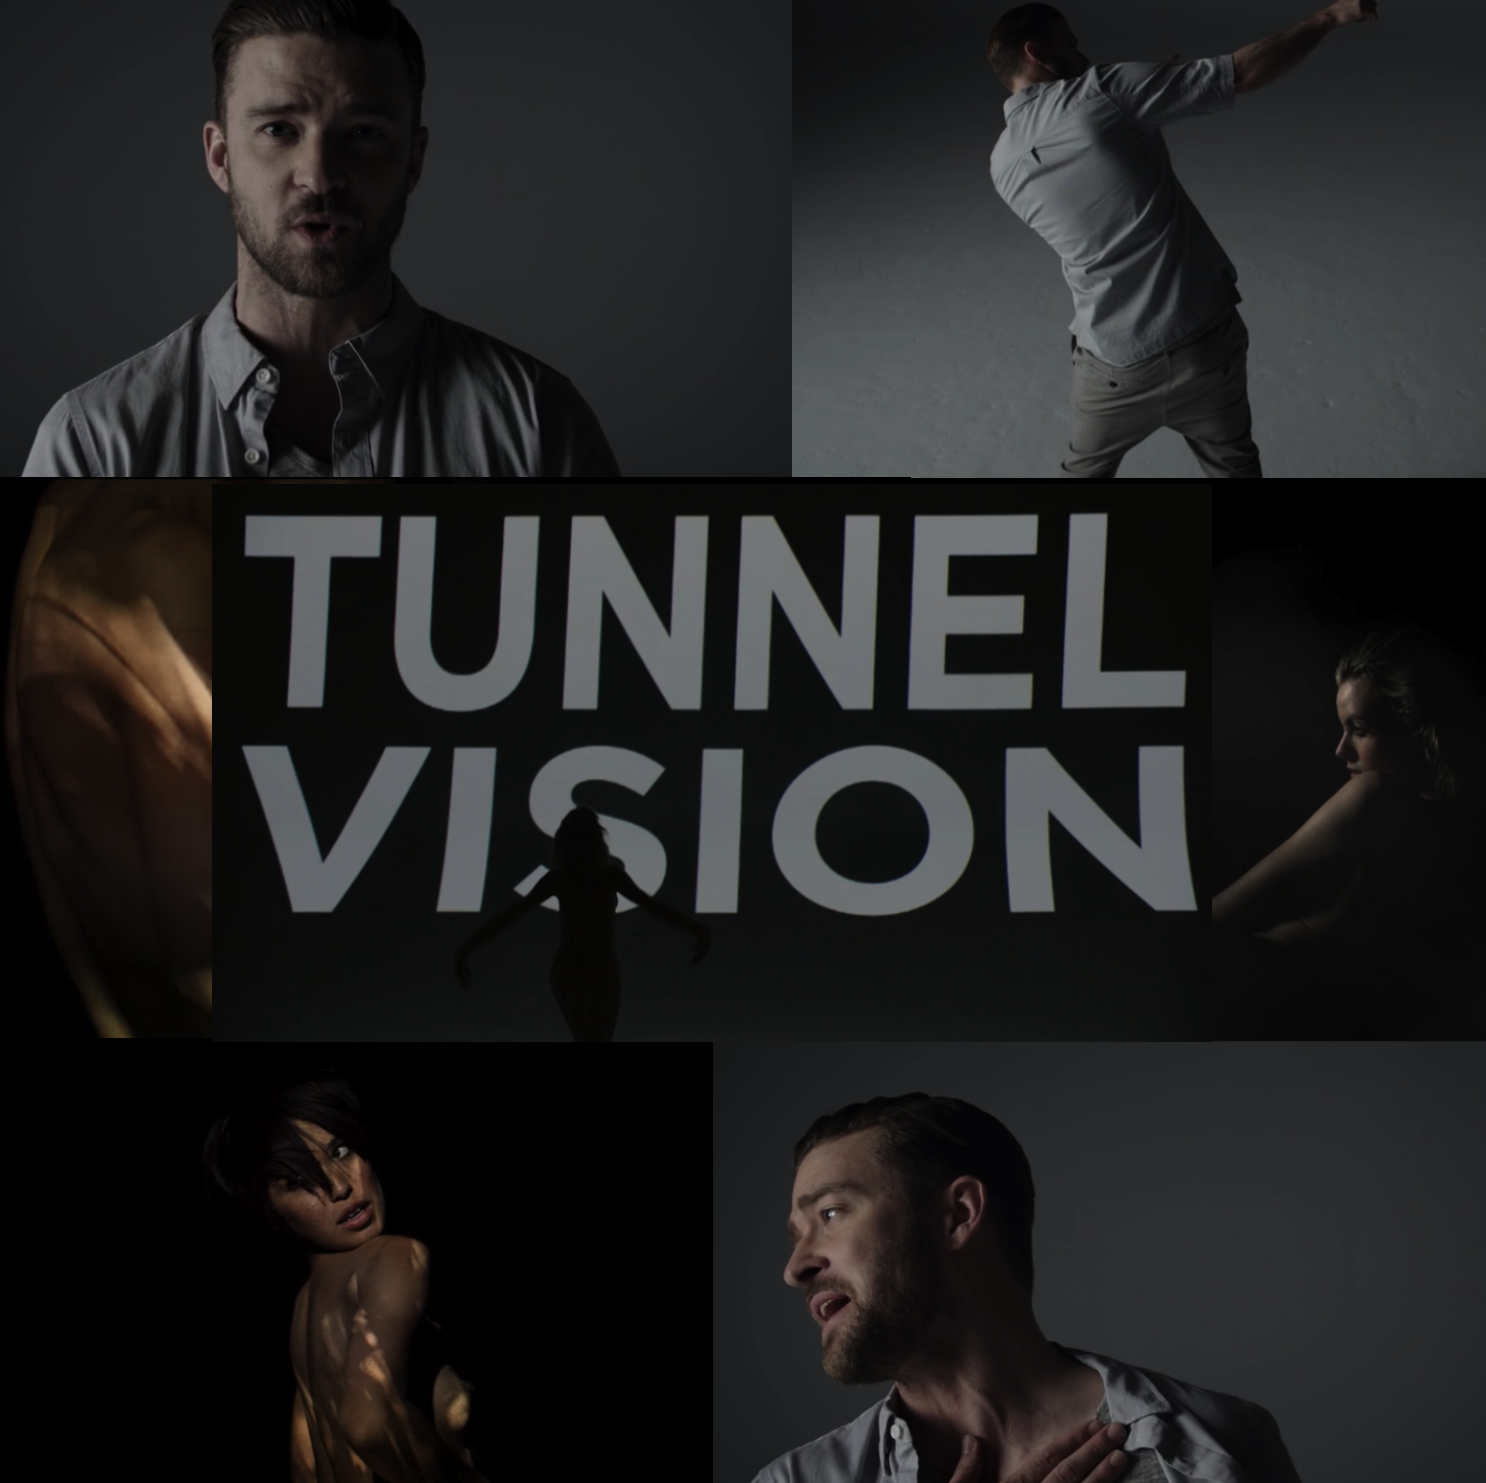 Justin Timberlake Tunnel Vision Nudity-Heavy Music Video 